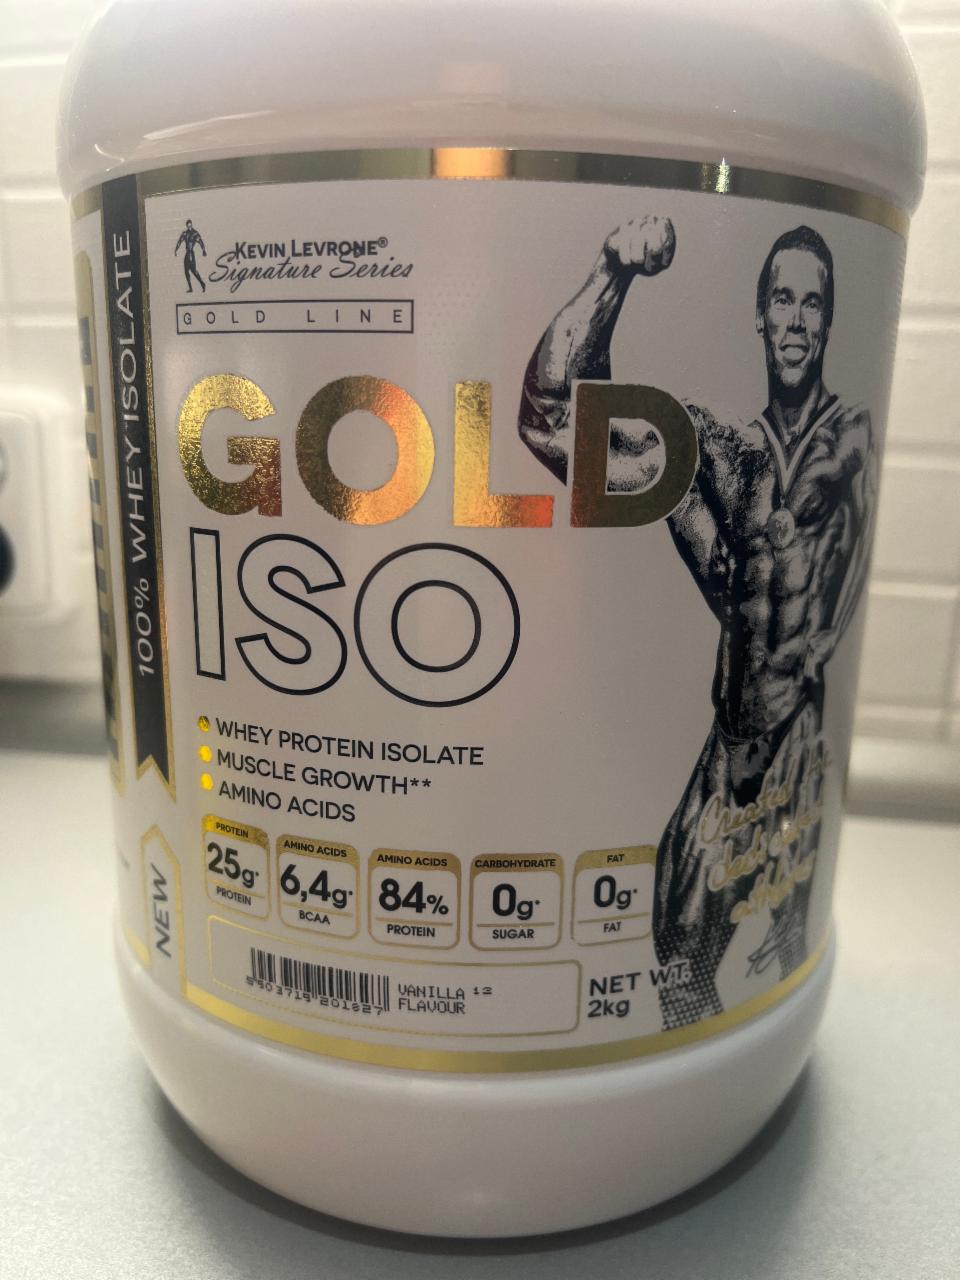 Fotografie - ISO GOLD whey protein isolate VANILLA flavour Kevin Levrone